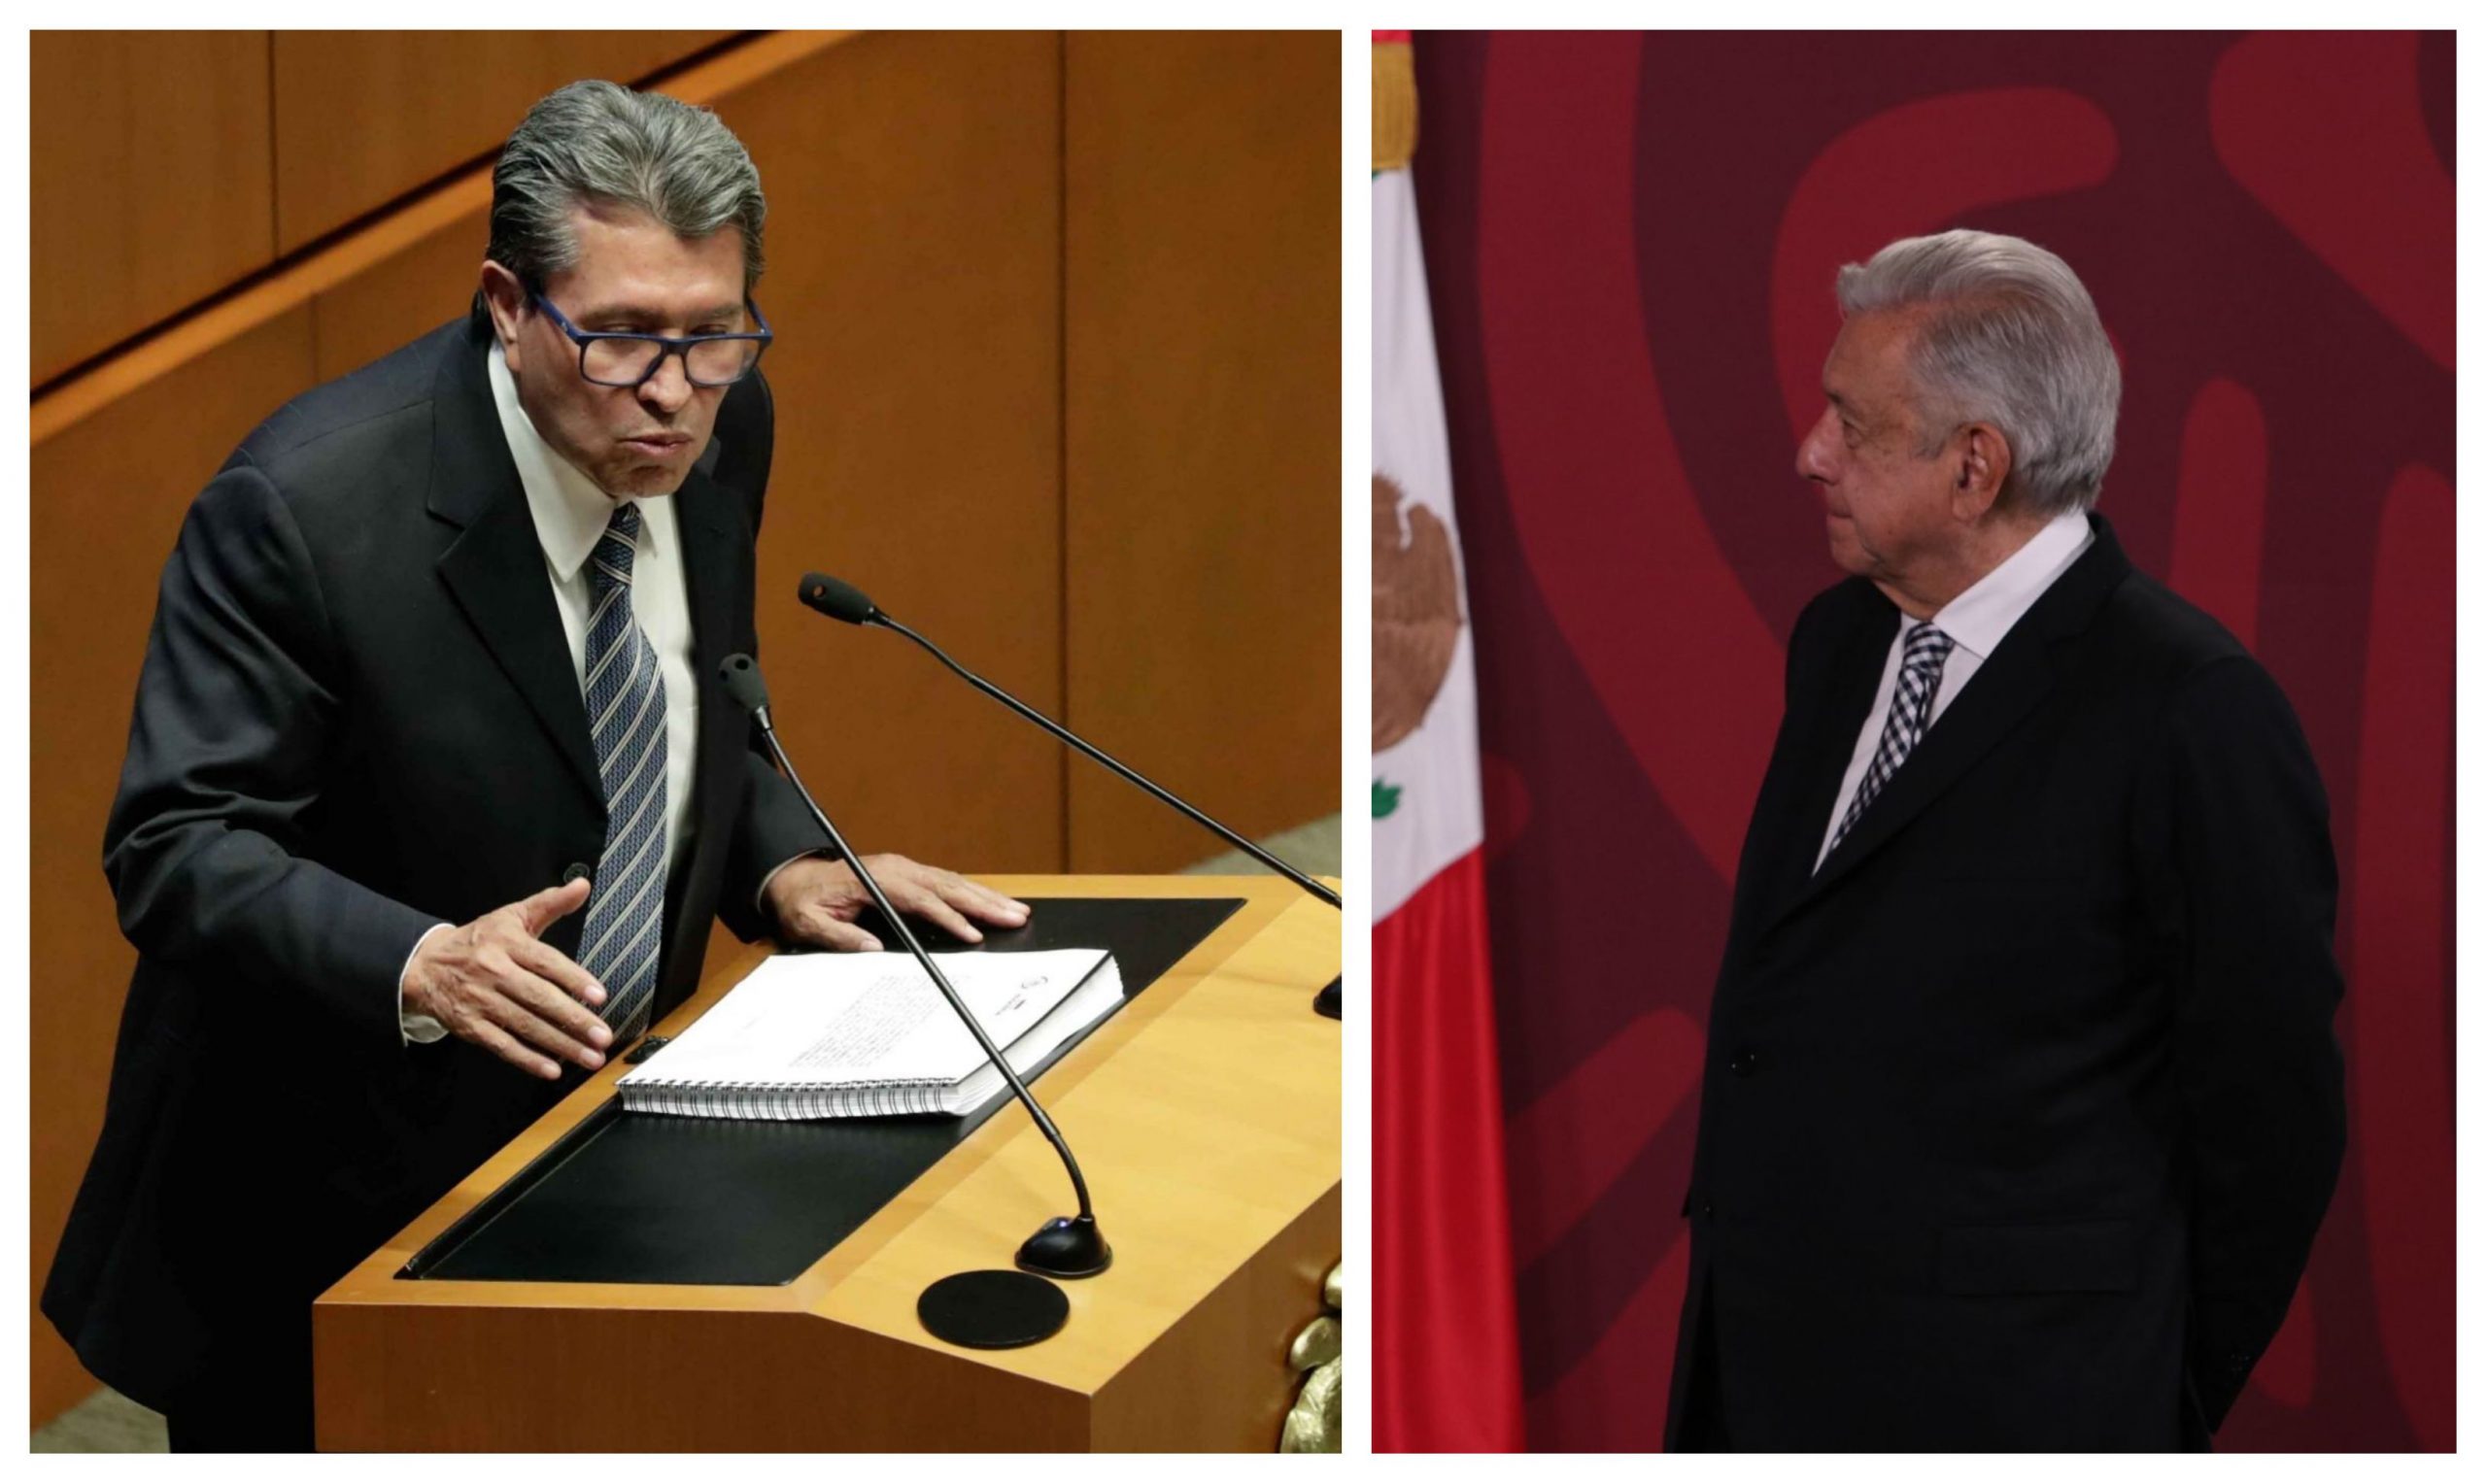 AMLO says the people will judge